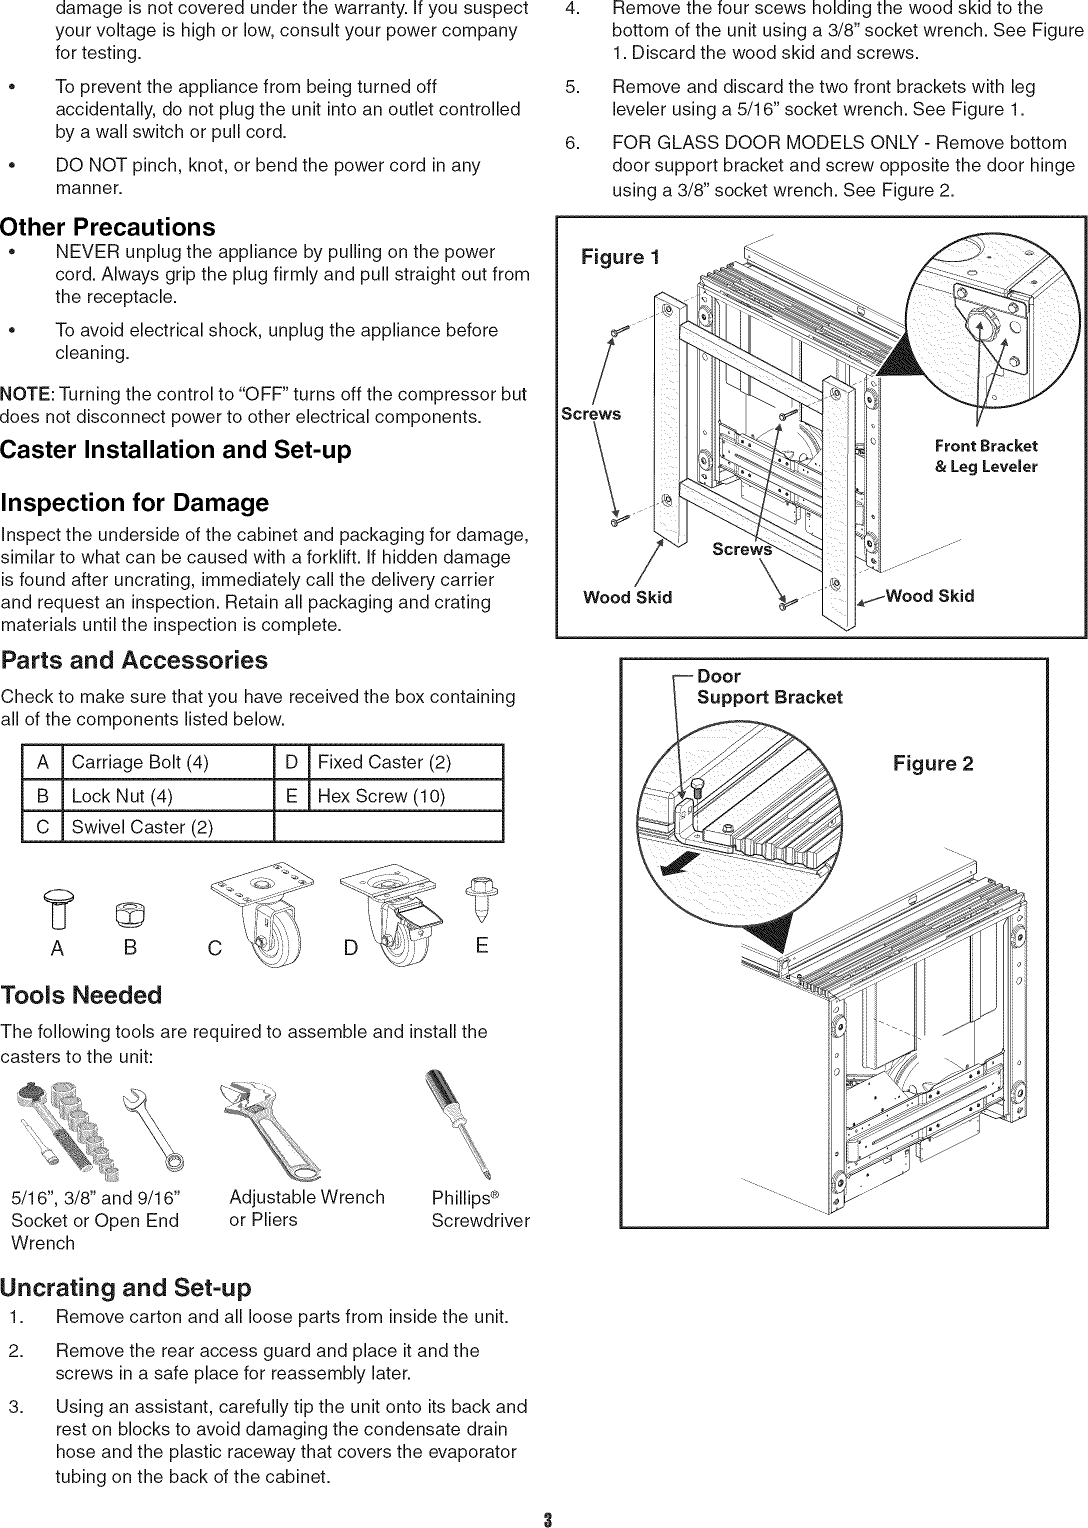 Page 3 of 9 - Kelvinator KFS220RHY1 User Manual  FREEZER - Manuals And Guides 1006066L